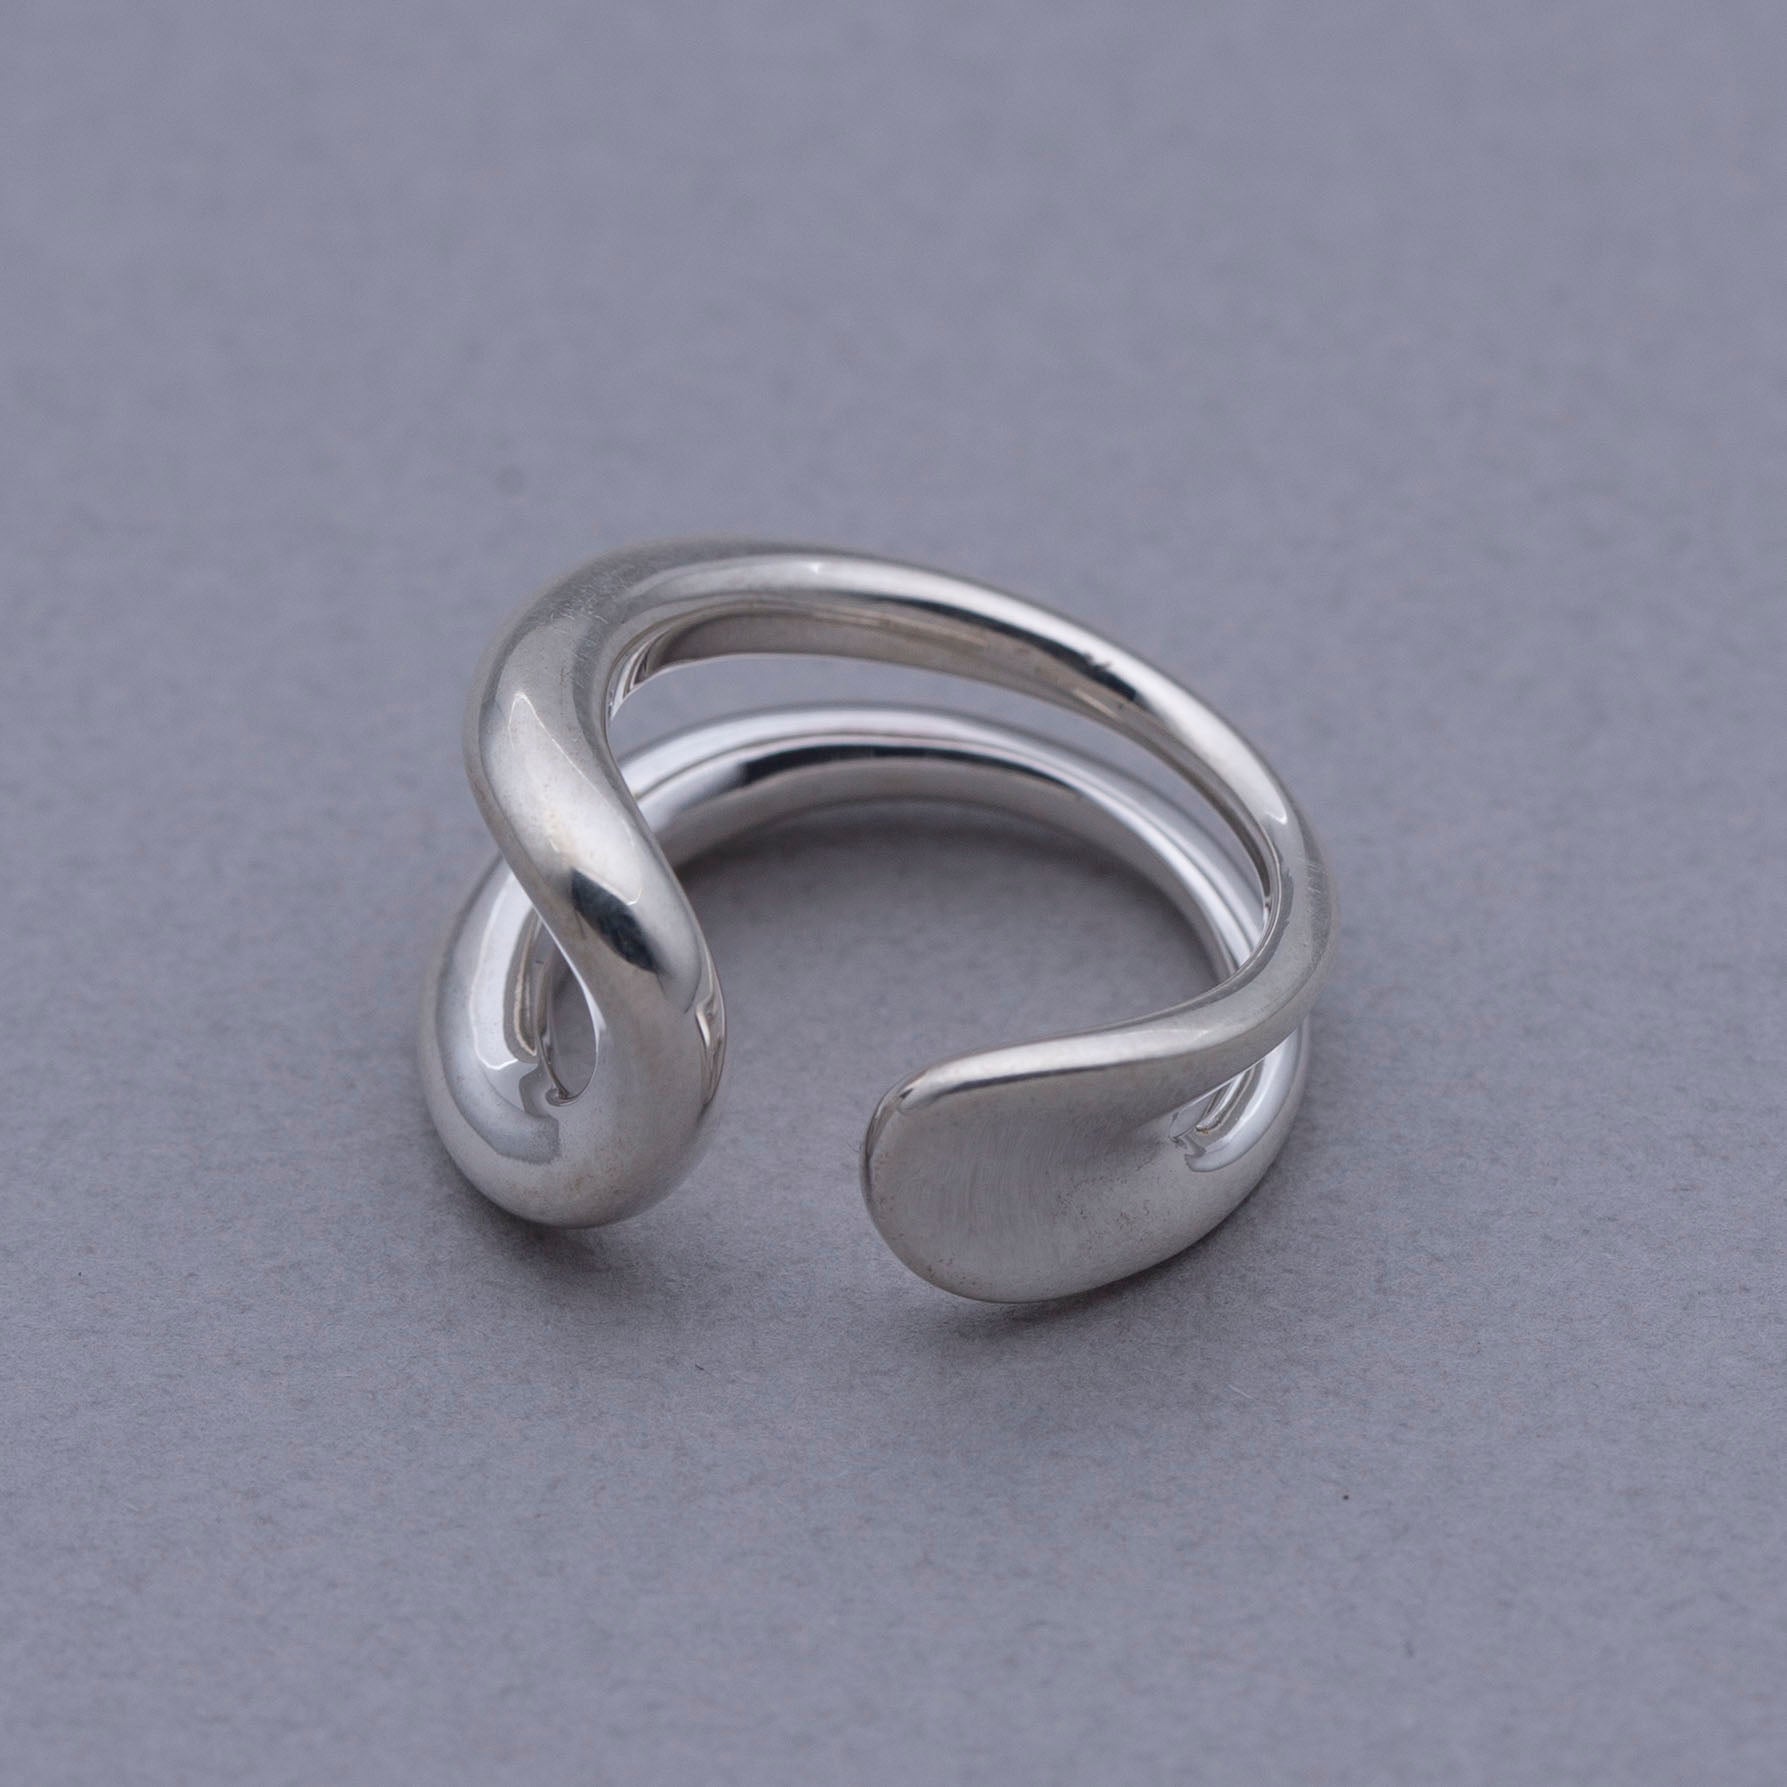 Safety pin ring Silver